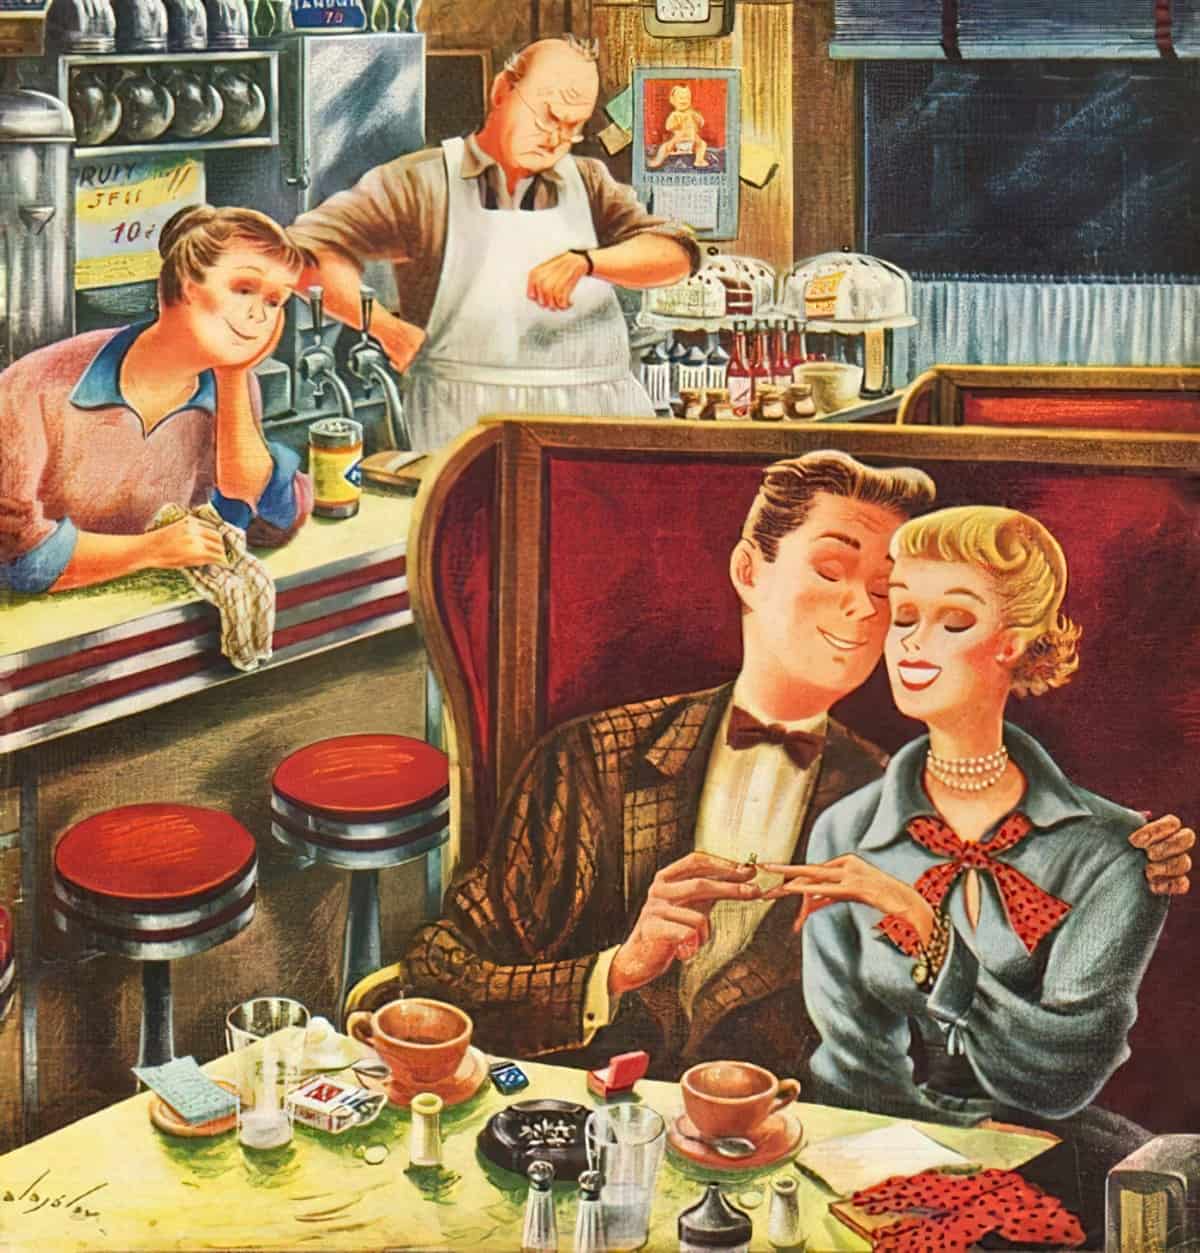 https://www.slaphappylarry.com/wp-content/uploads/2023/01/Young-Love-After-Closing-art-by-Constantin-Alajalov.-Detail-from-Saturday-Evening-Post-cover-July-15-1950.jpeg